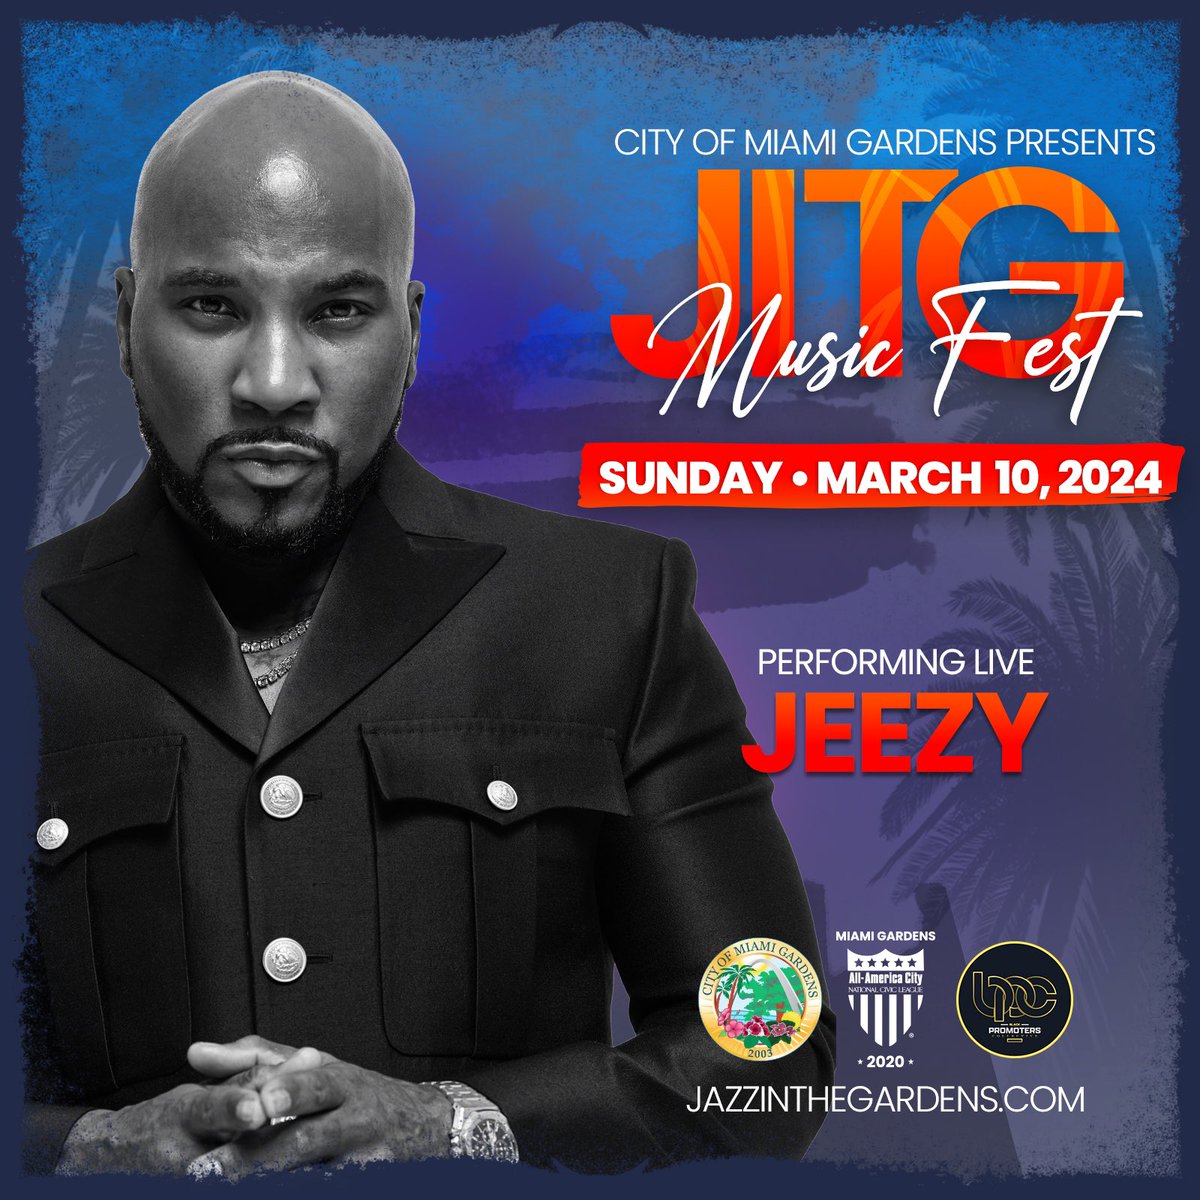 Jeezy is hitting the stage at #JITG2024 and you don't want to miss it! 🎤🔥 From trap anthems to timeless hits, get ready for a performance that'll have you on your feet all night. Miami Gardens, March 10th - mark your calendars and get your tickets. Let's turn up the heat! #JITG